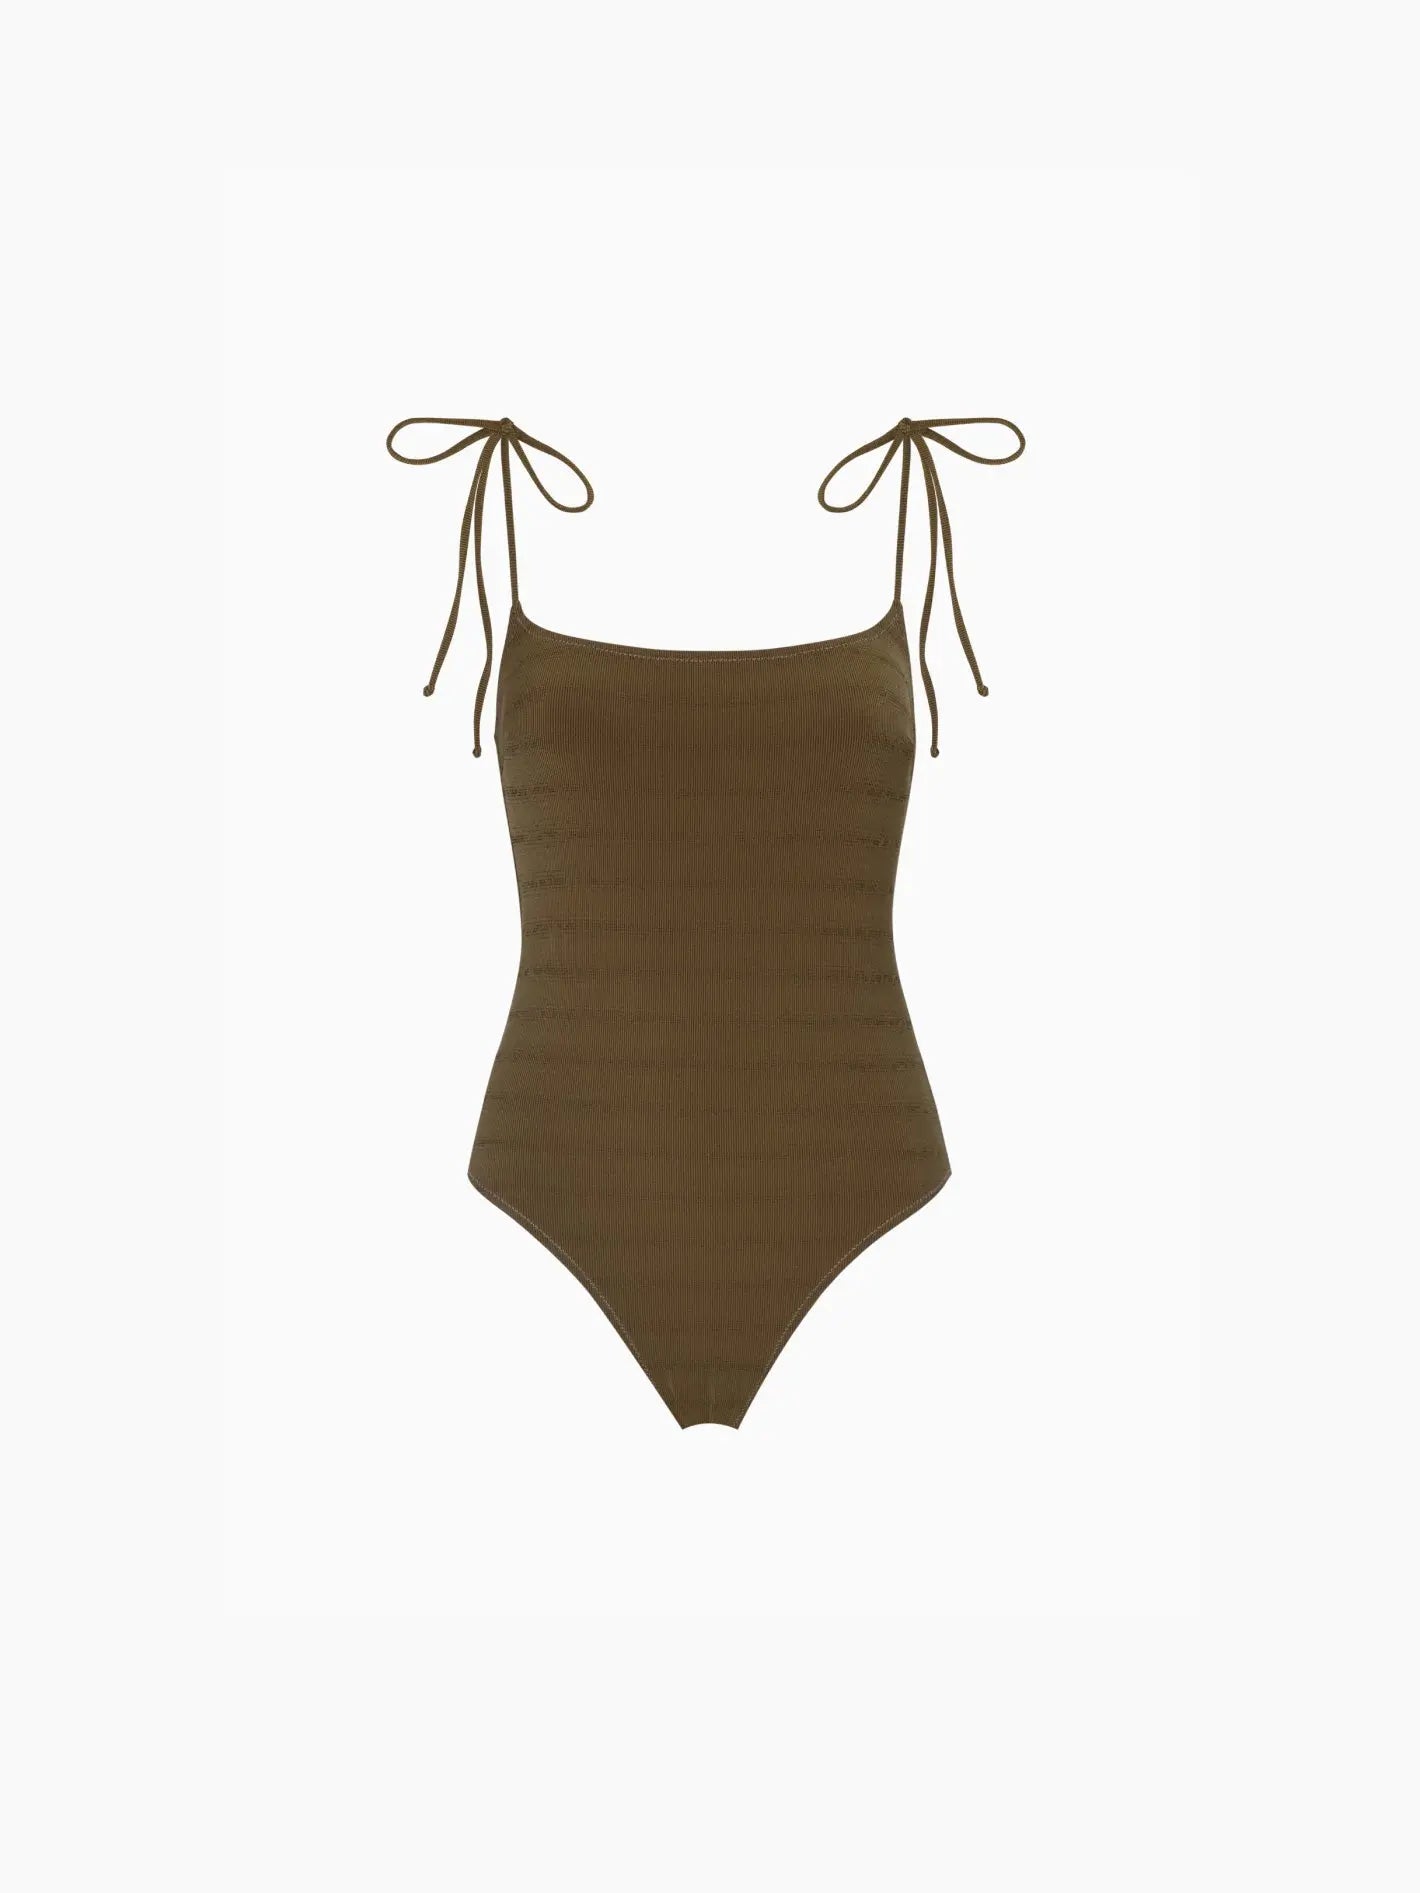 Nina Swimwear Khaki by Pale, available at bassalstore. The swimwear features a square neckline and shoulder ribbons that tie into bows. The design has a high-cut leg opening, providing a sleek and modern look. It is displayed against a white background.